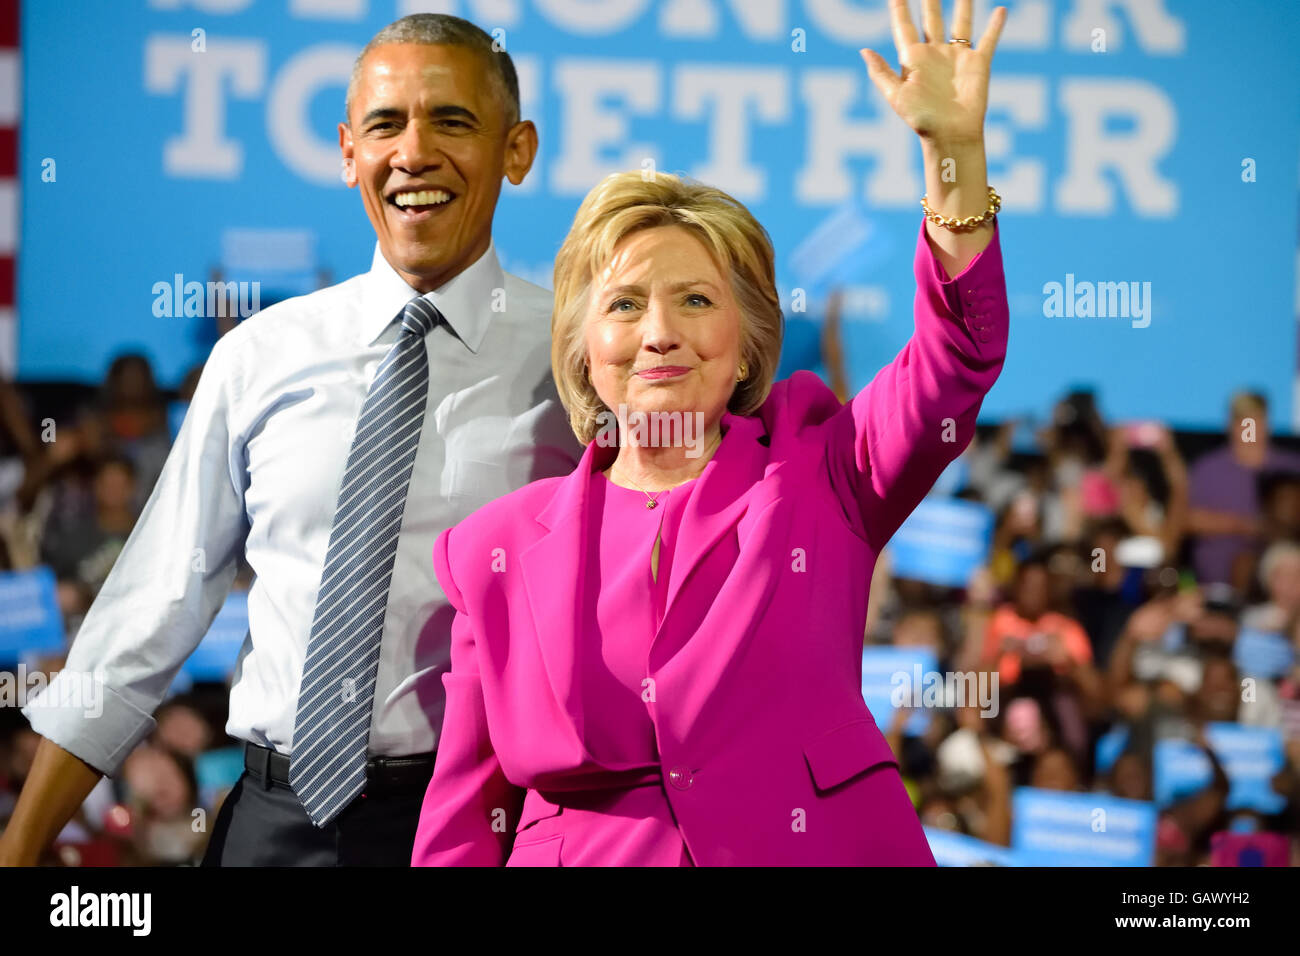 Charlotte, NC, USA. 5th July, 2016. US President Barack Obama stands on stage with presumptive Democratic presidential nominee, Hillary Clinton, right, during their first joint campaign appearence. The event was held at the Charlotte Convention Center. Credit:  Evan El-Amin/Alamy Live News Stock Photo